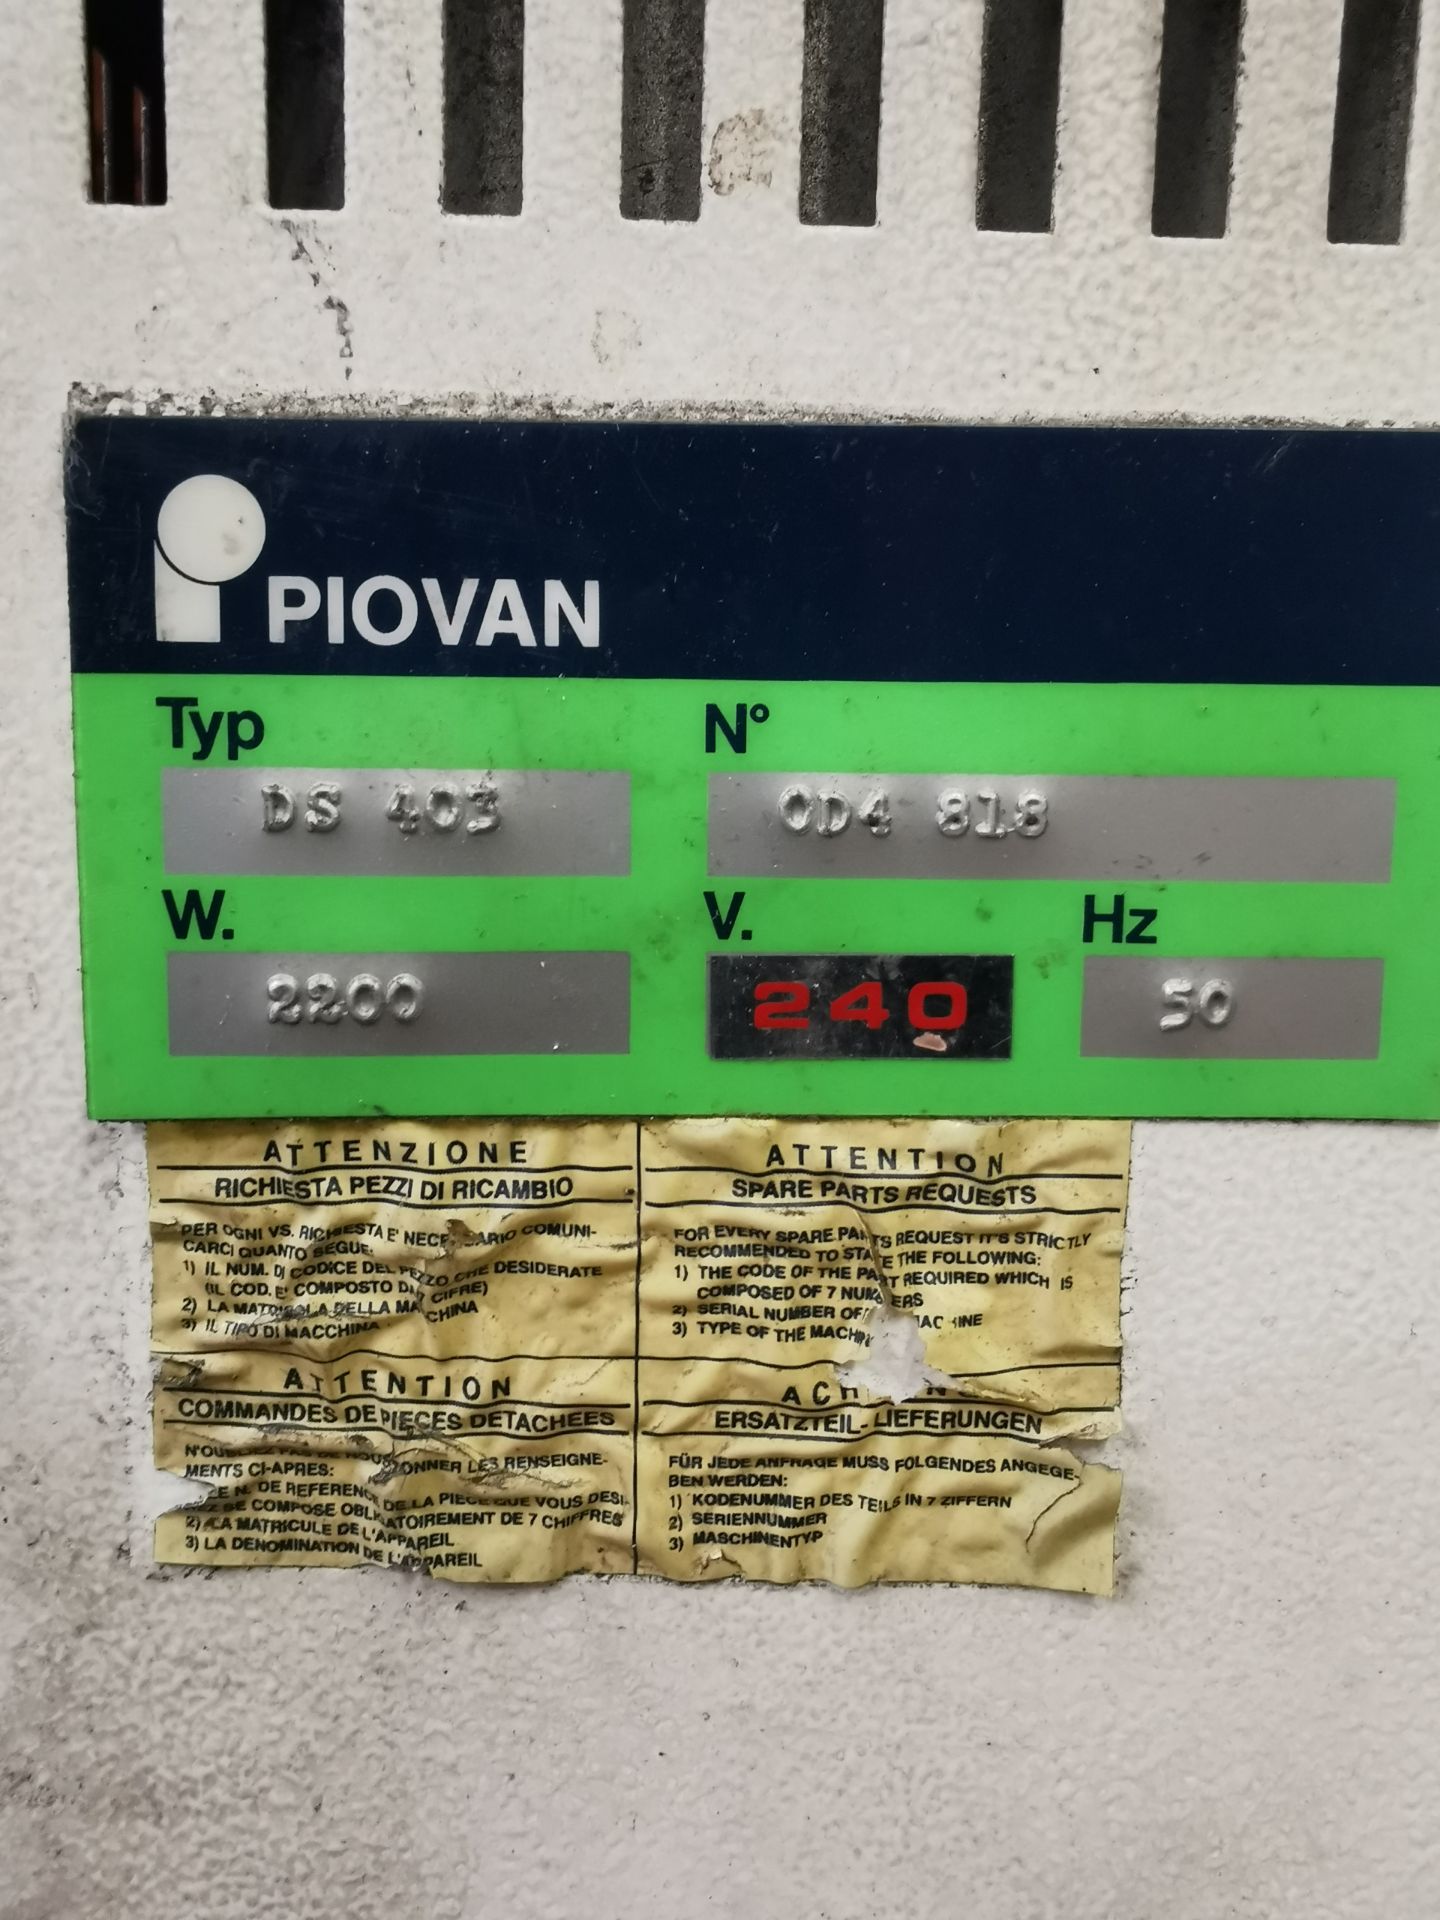 Piovan DS 403 Material Dryer - Image 4 of 5